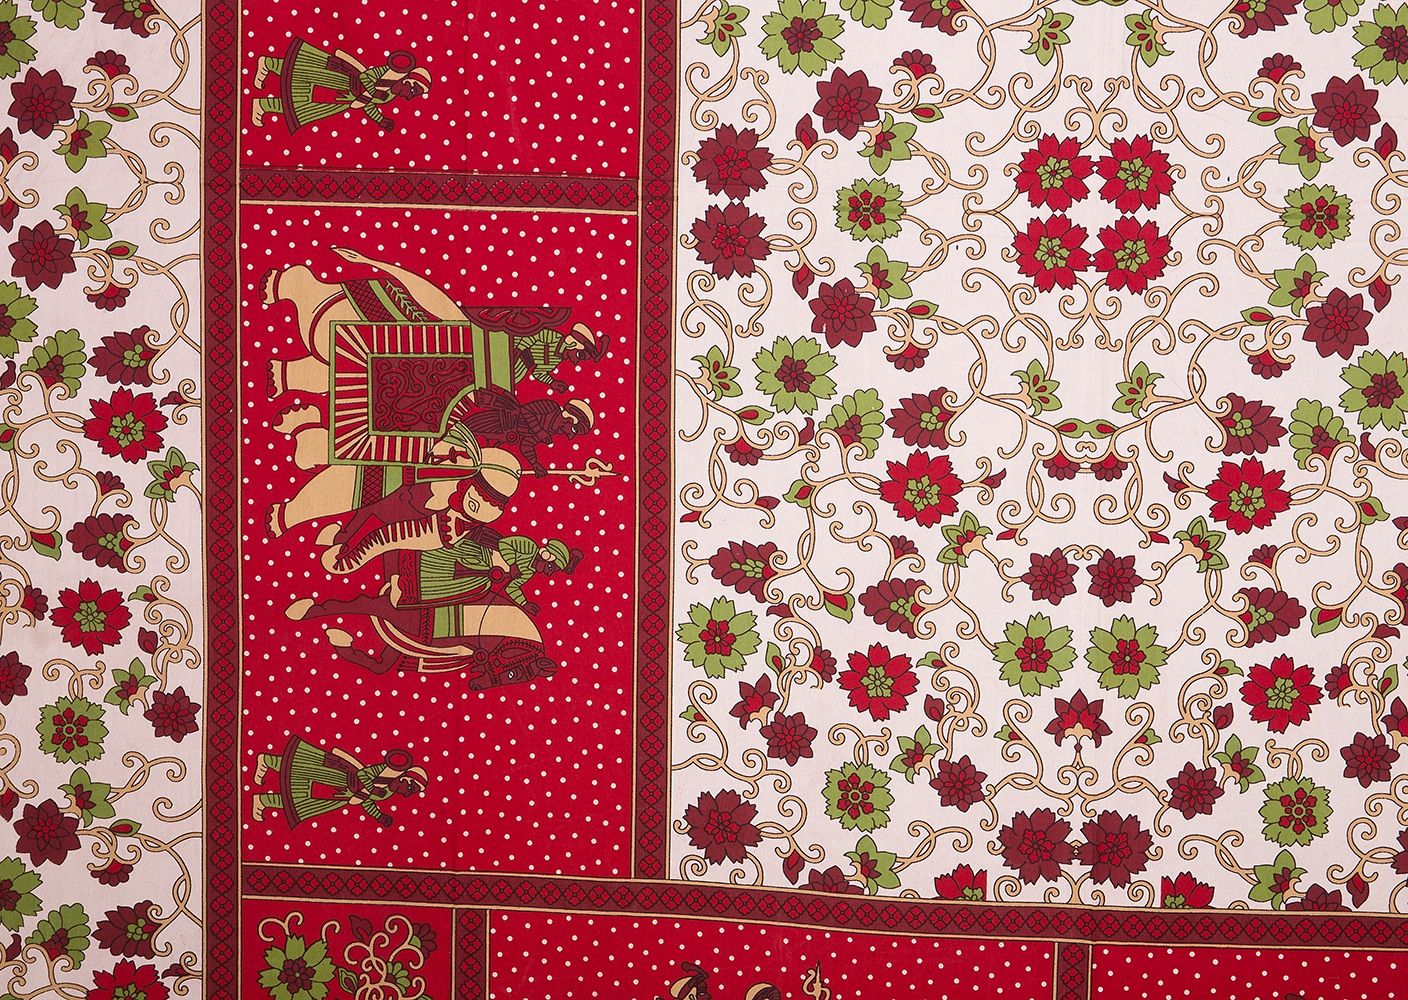 Red border with barat pattern double bed sheet